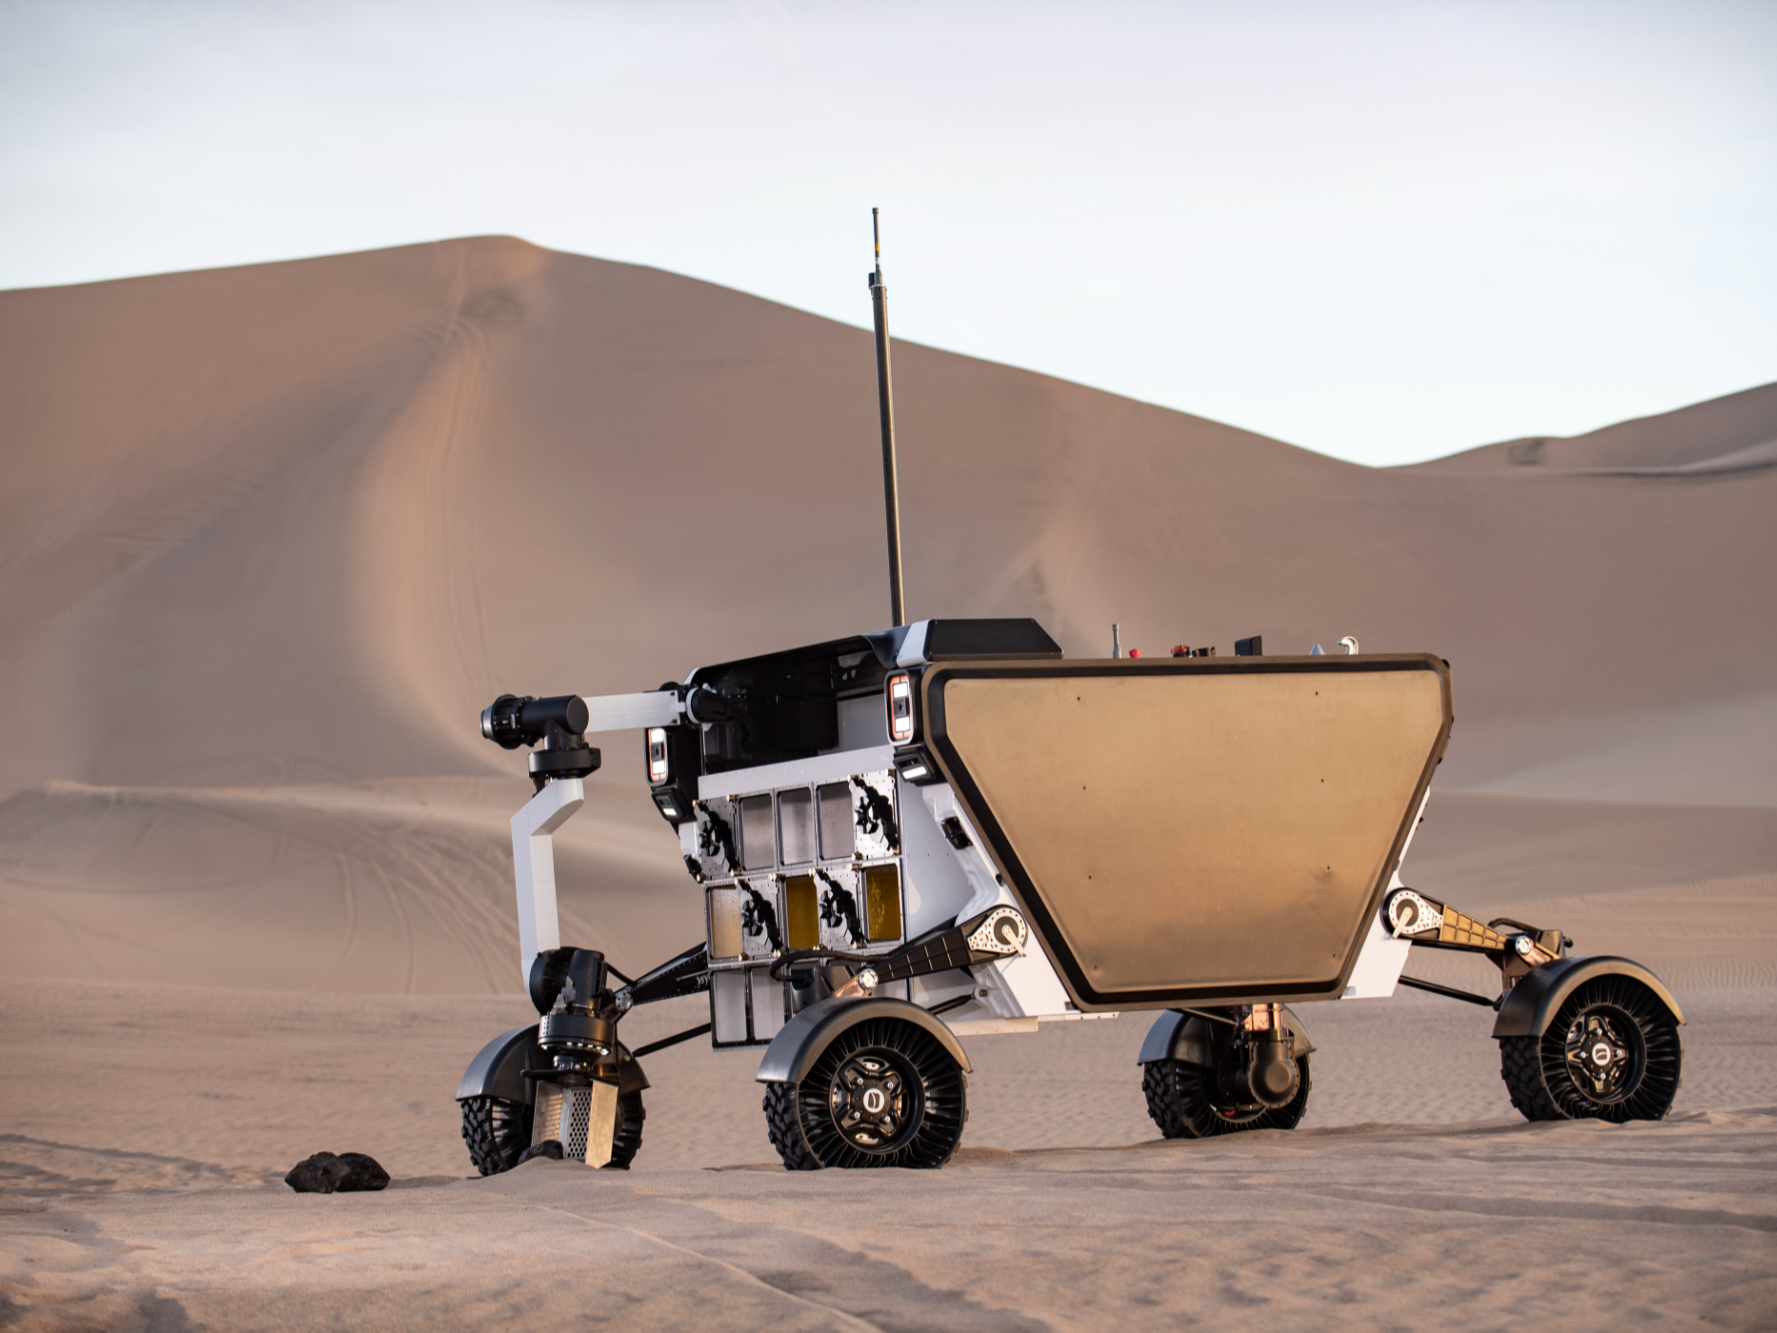 Astrolab’s Flex rover is capable of operating autonomously to carry out missions on the Moon